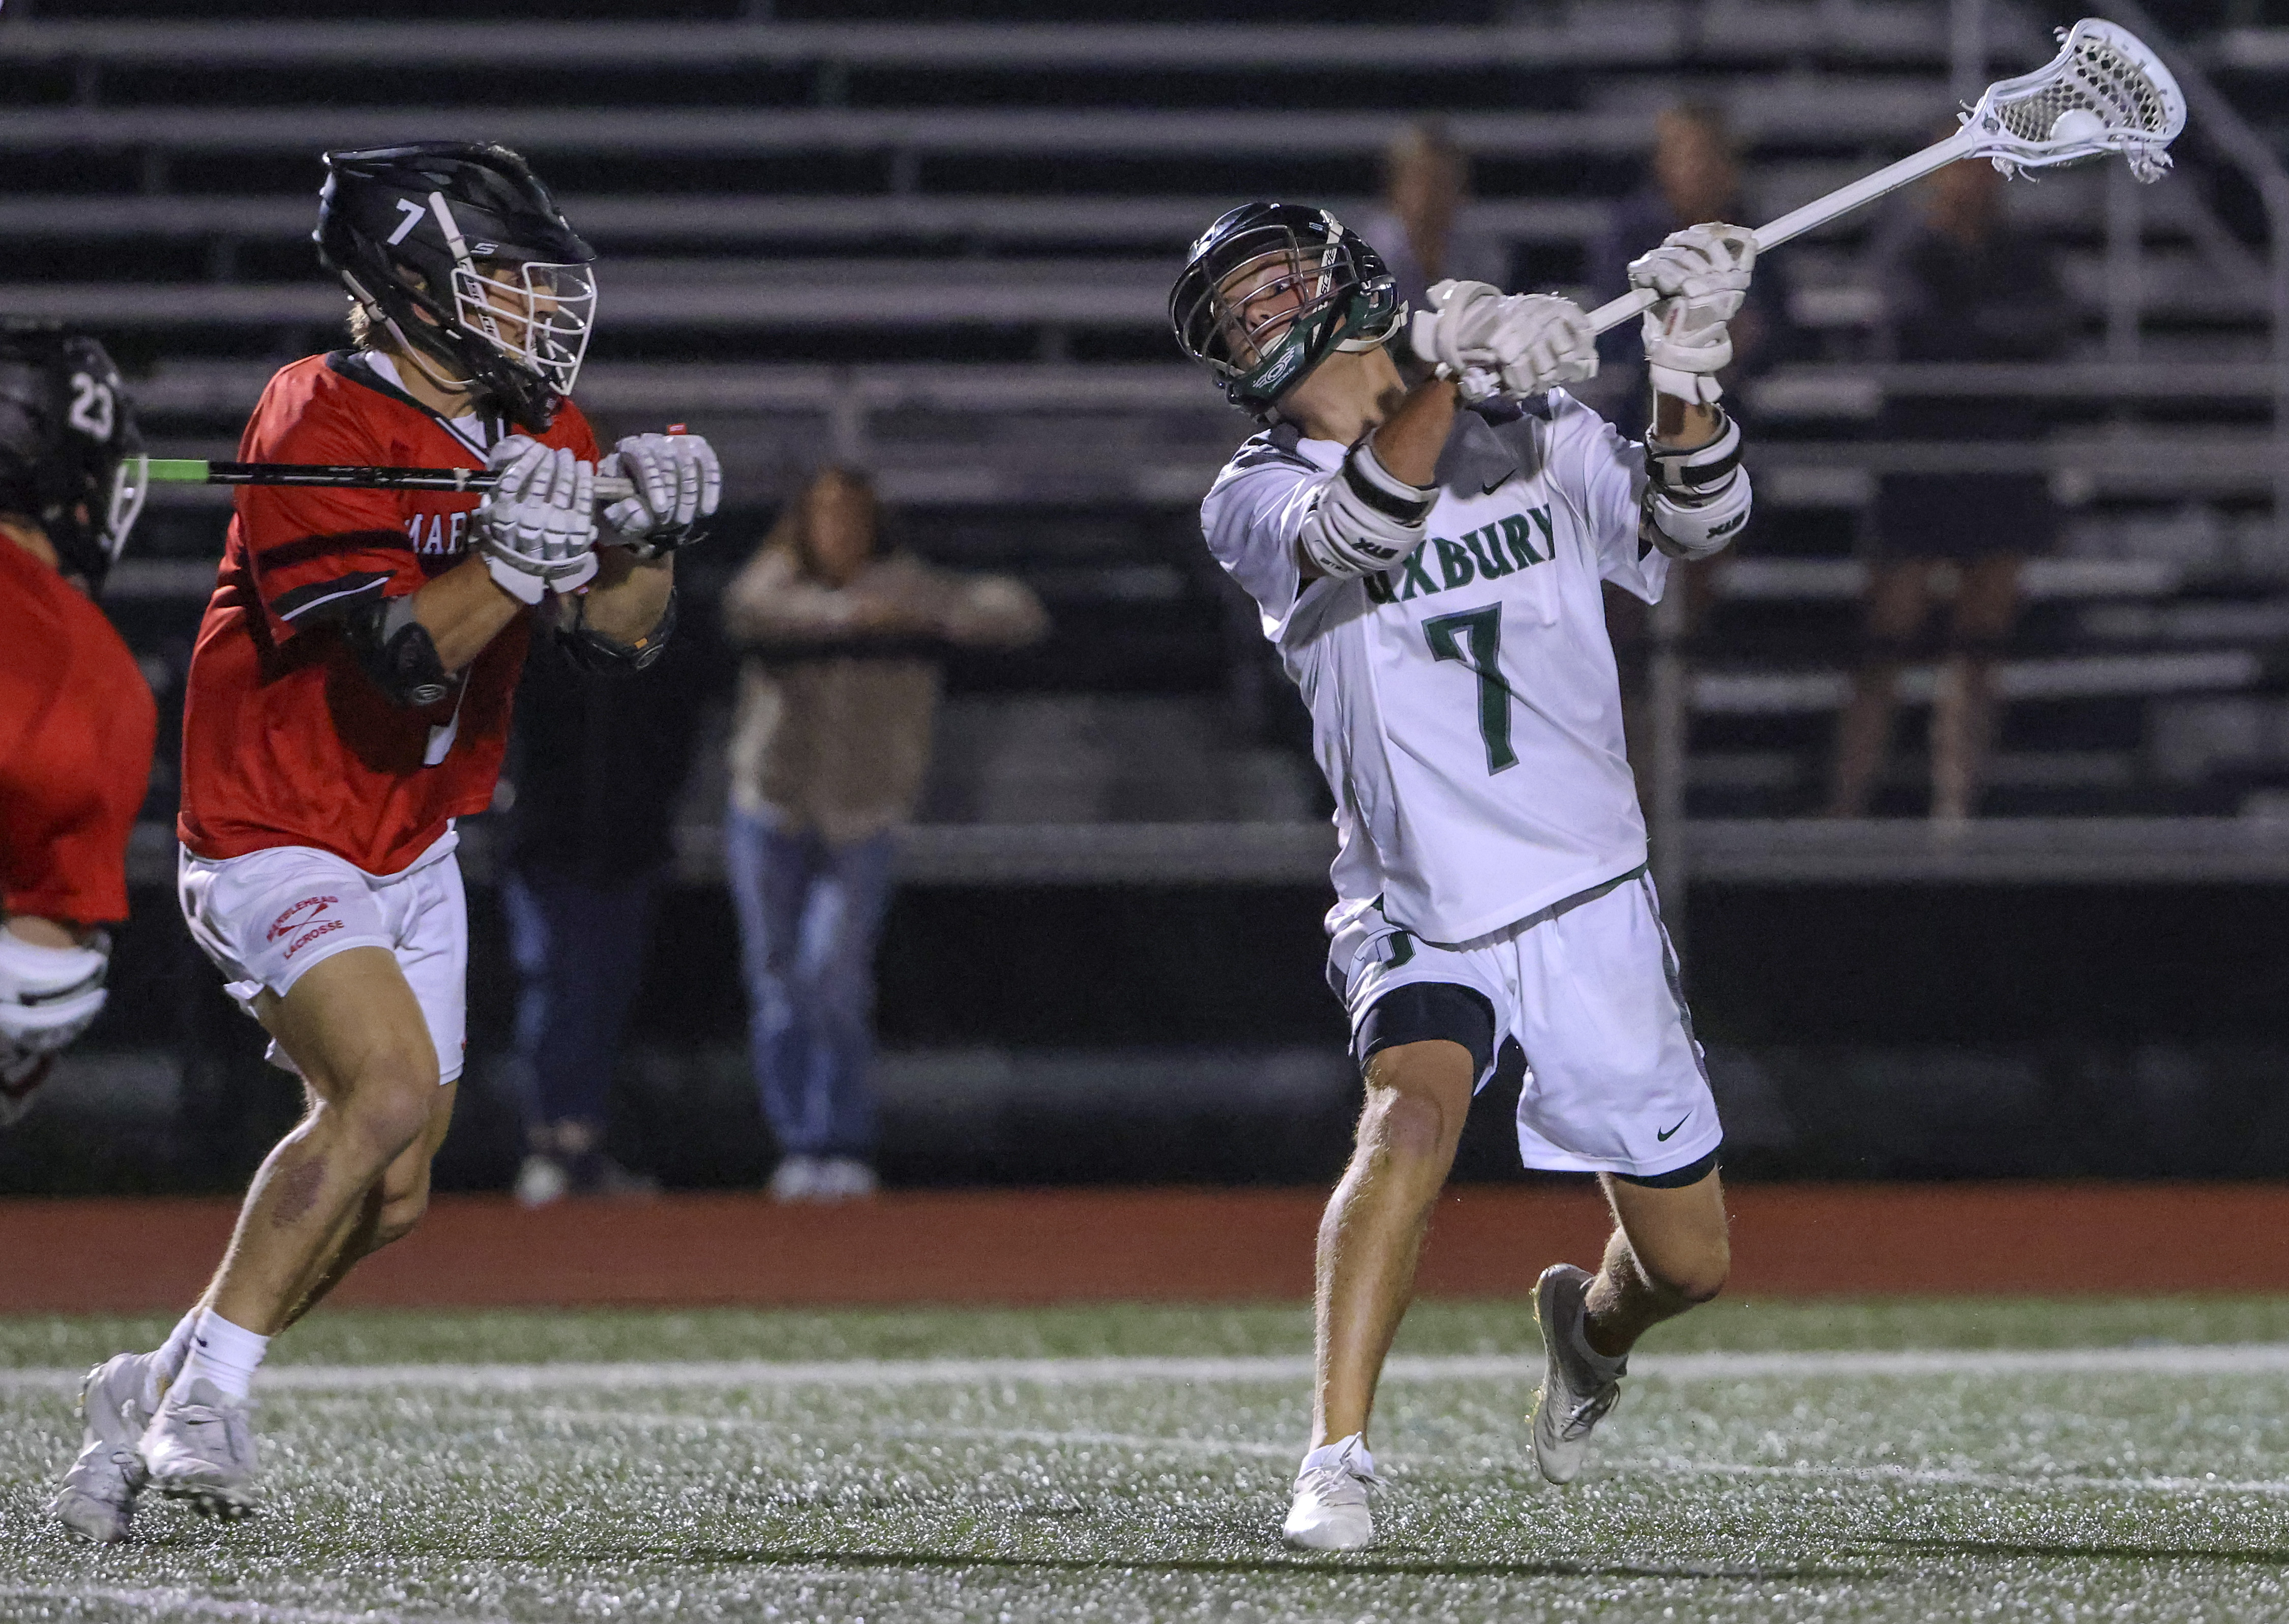 BOYS LACROSSE PLAYOFFS: Duxbury on Cloud Nine after another